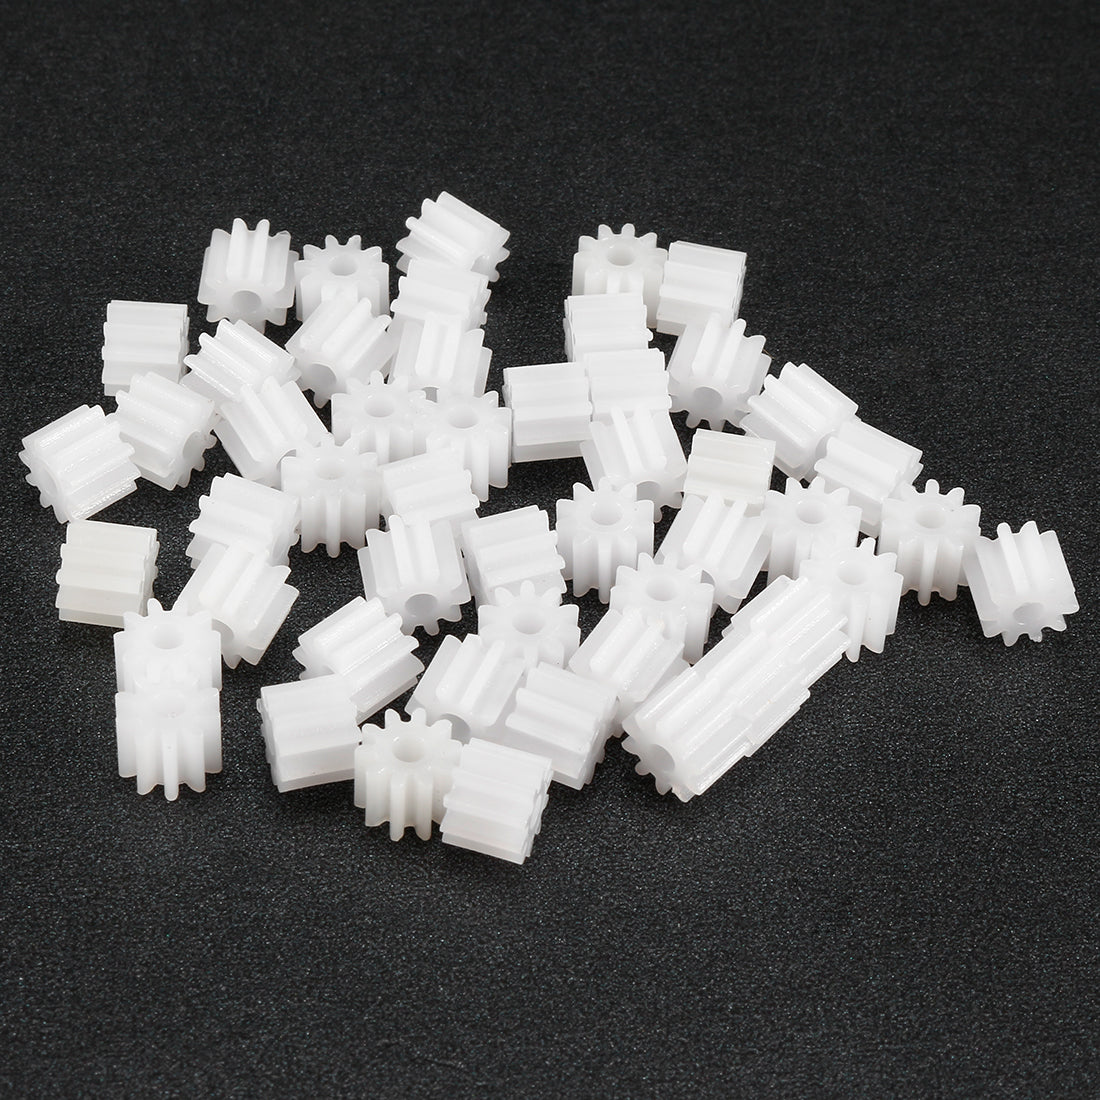 uxcell Uxcell 50Pcs 102A Plastic Gear Accessories 6mm OD with 10 Teeth for DIY Car Robot Motor